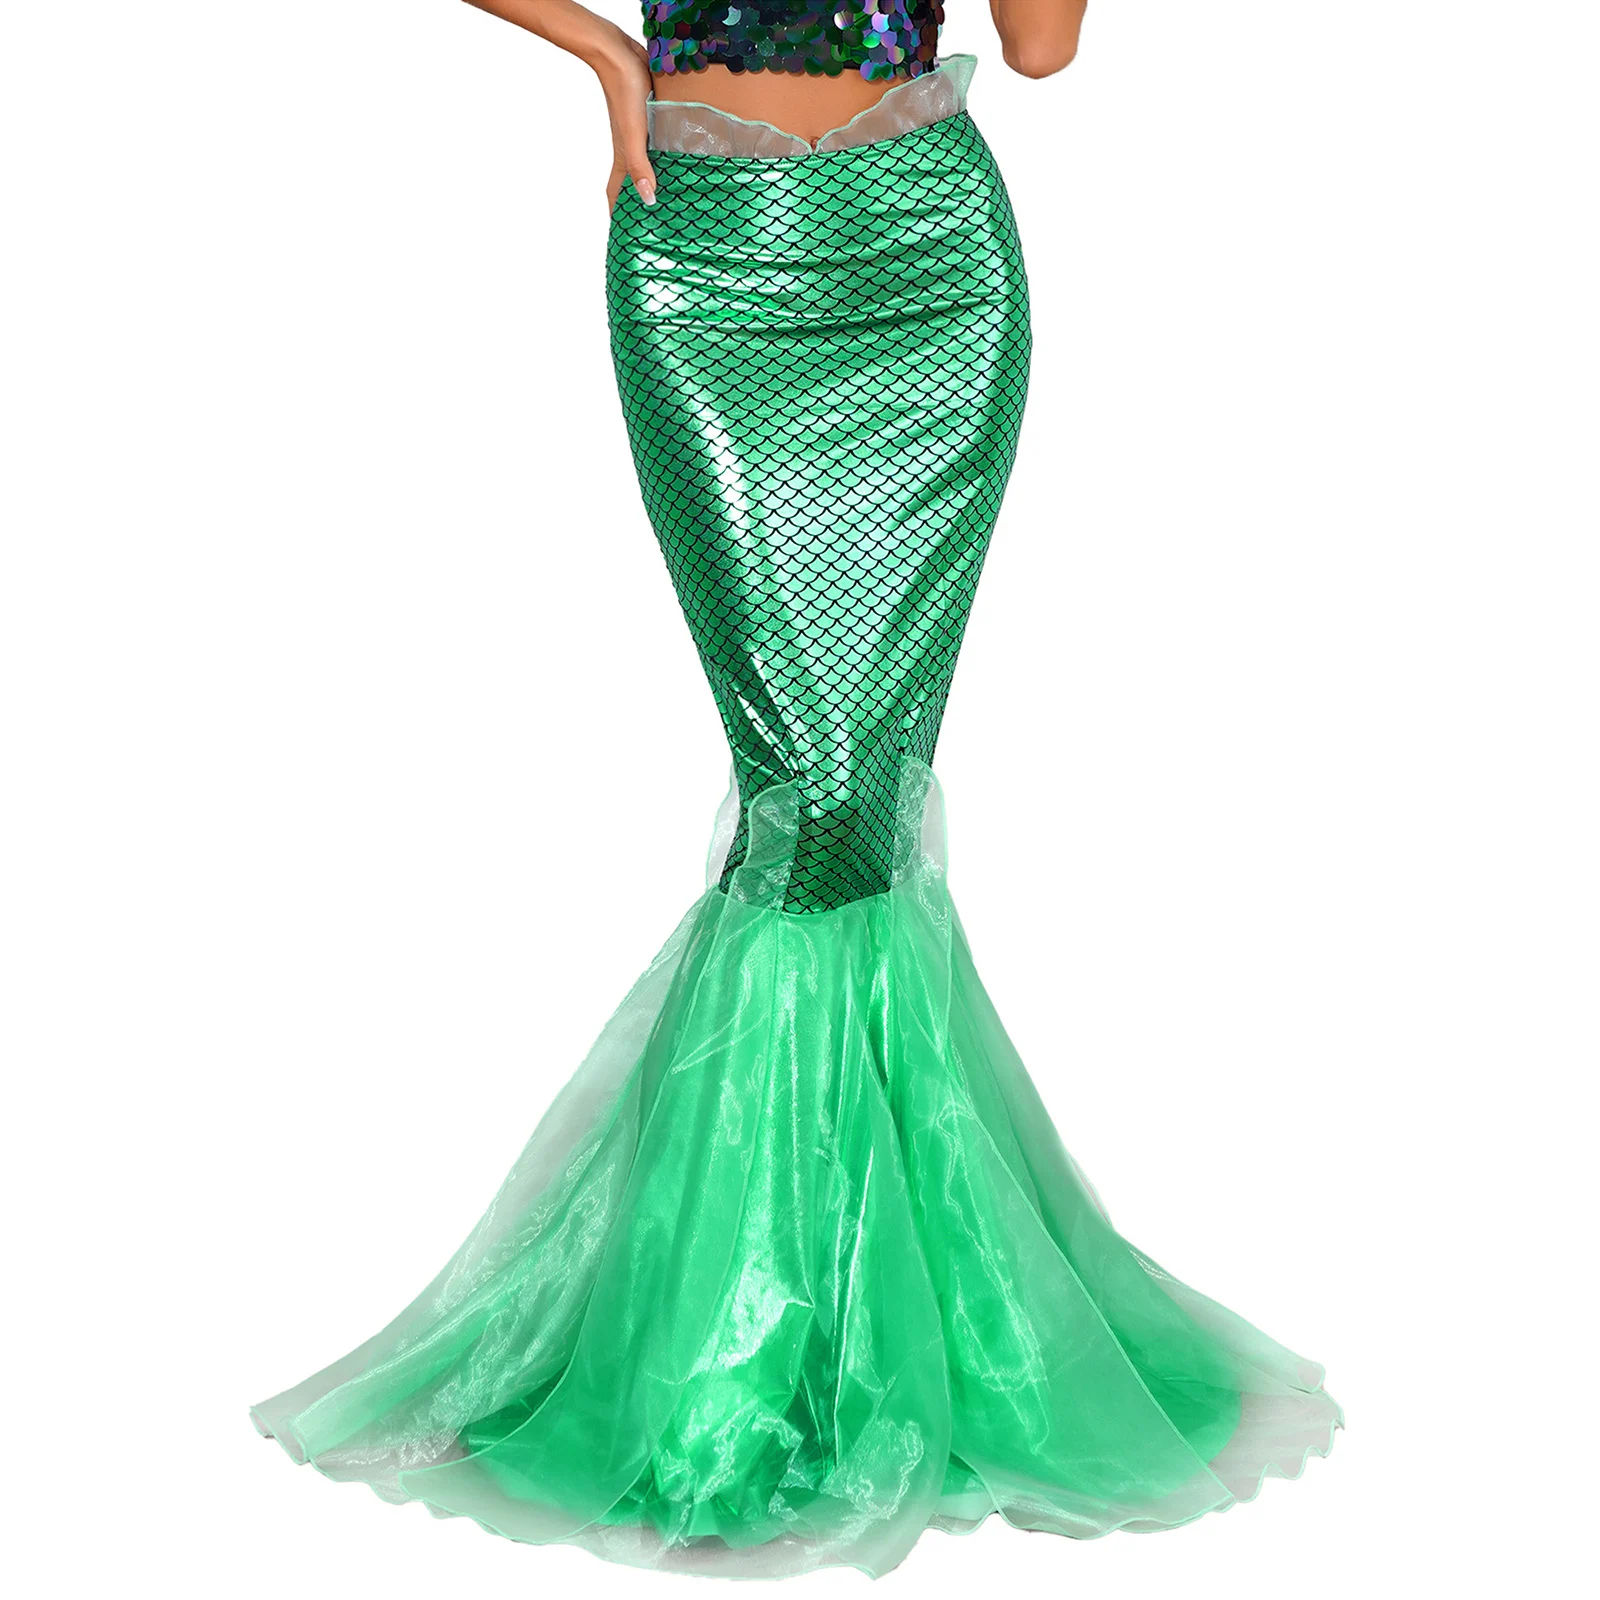 

Halloween Womens Mermaid Cosplay Maxi Skirt Cascading Tulle Fish Scale Print Metallic Shiny Fishtail Skirts for Dress-up Party